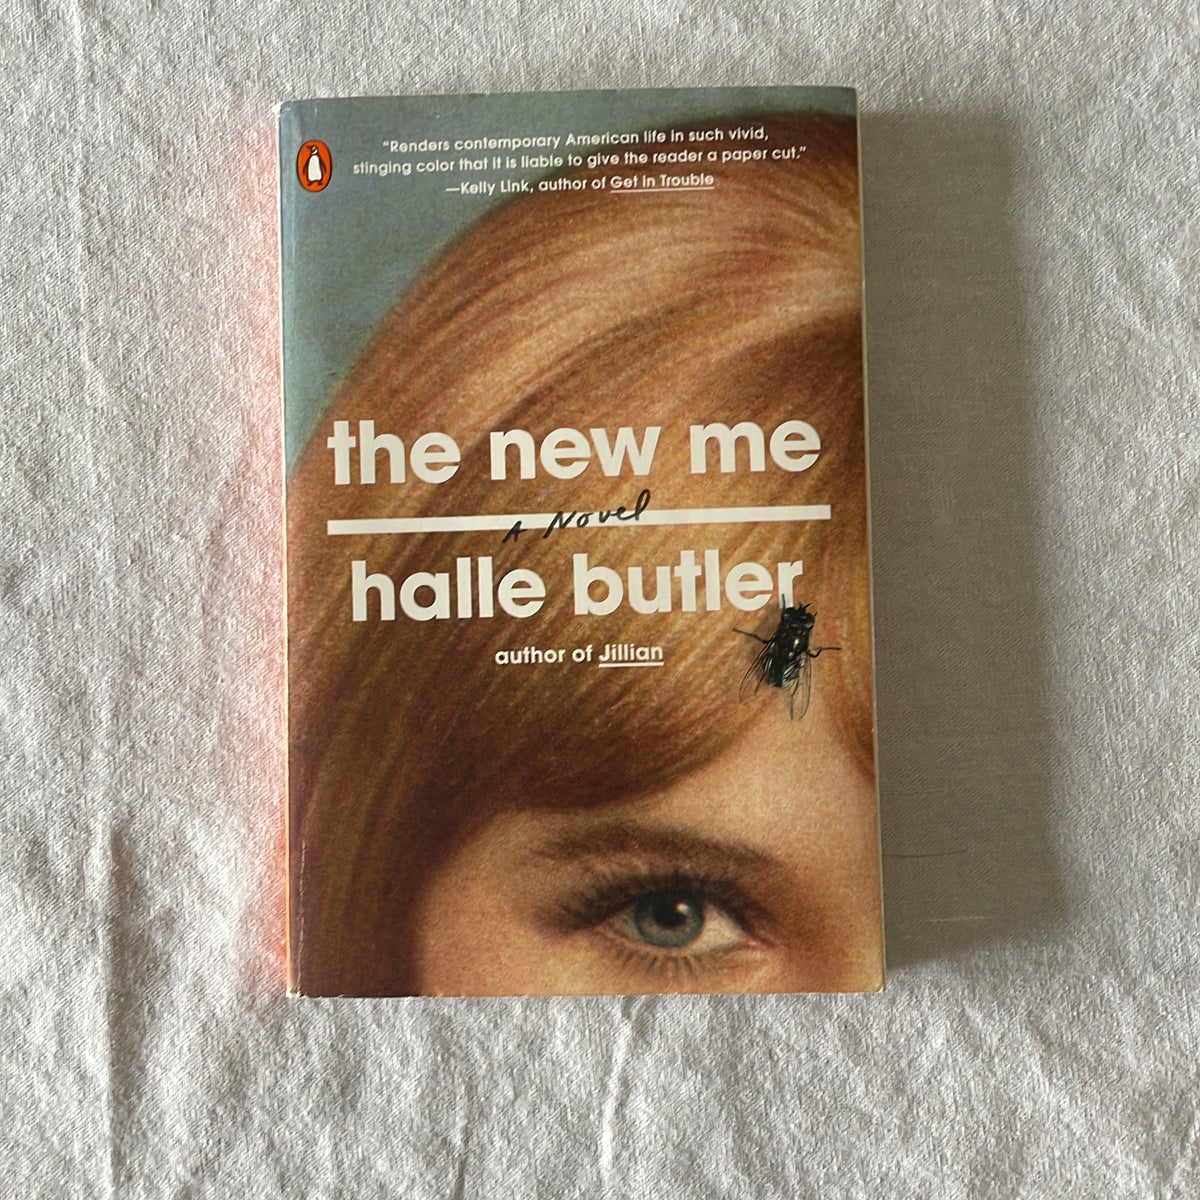 Halle Butler's The New Me and the Trend of Repulsive Realism